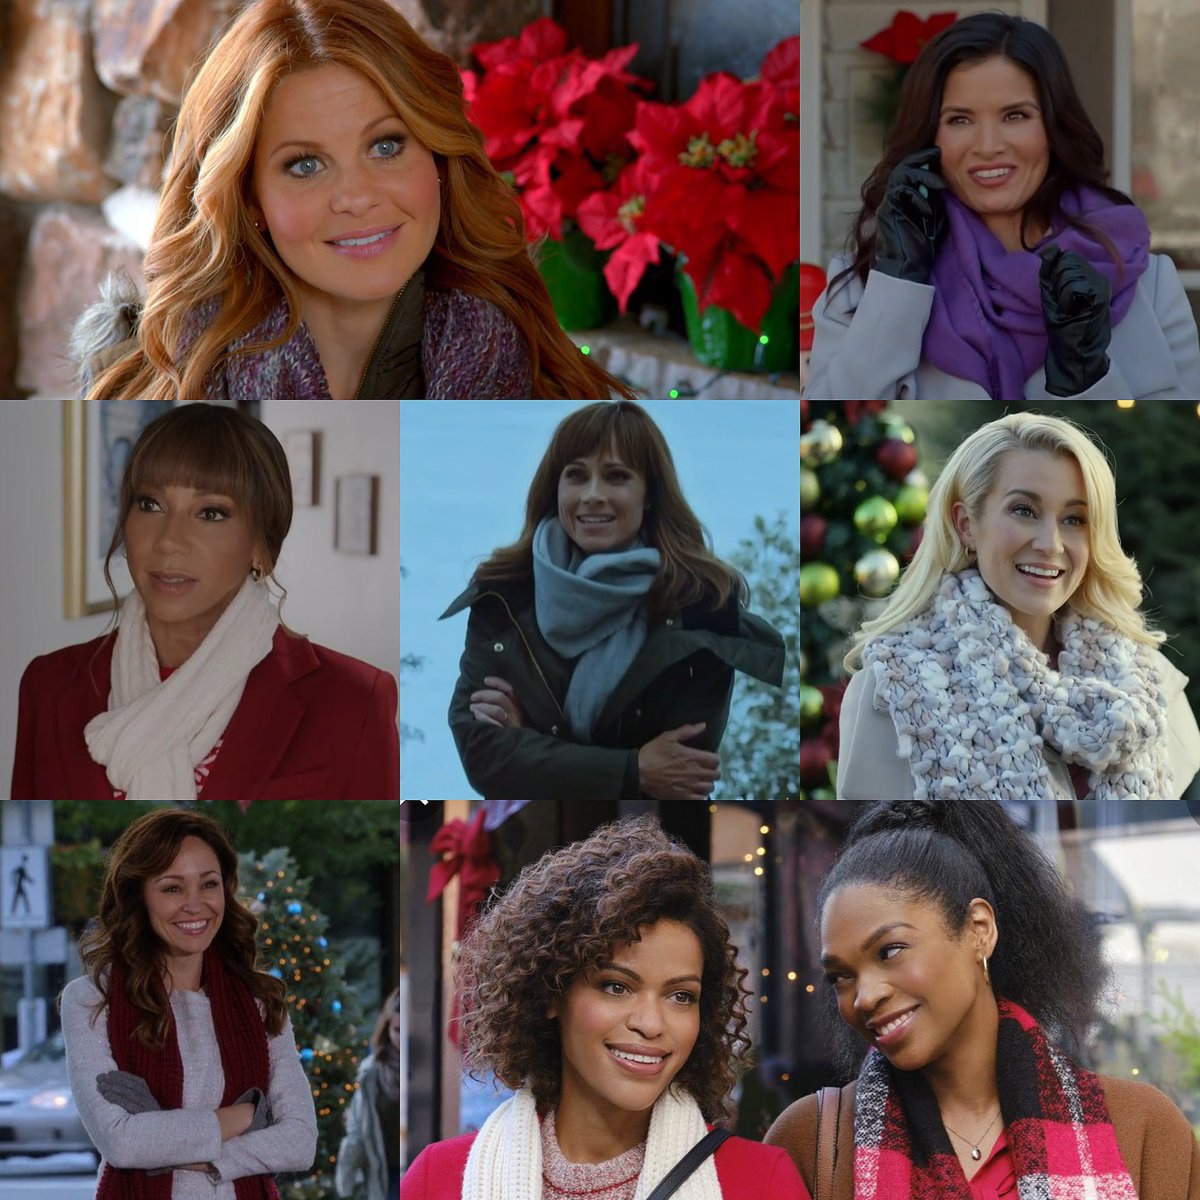 🧣Christmas Scarf Perfection🧣 They are all so beautiful!! ☺️☺️☺️ #ChristmasinJuly #HallmarkChannel #HallmarkMovies #HallmarkMoviesandMysteries #hallmarkies #CandaceCameronBure #KatrinaLaw #HollyRobinsonPeete #NikkiDeloach #KelliePickler #AutumnReeser #AlvinaAugust